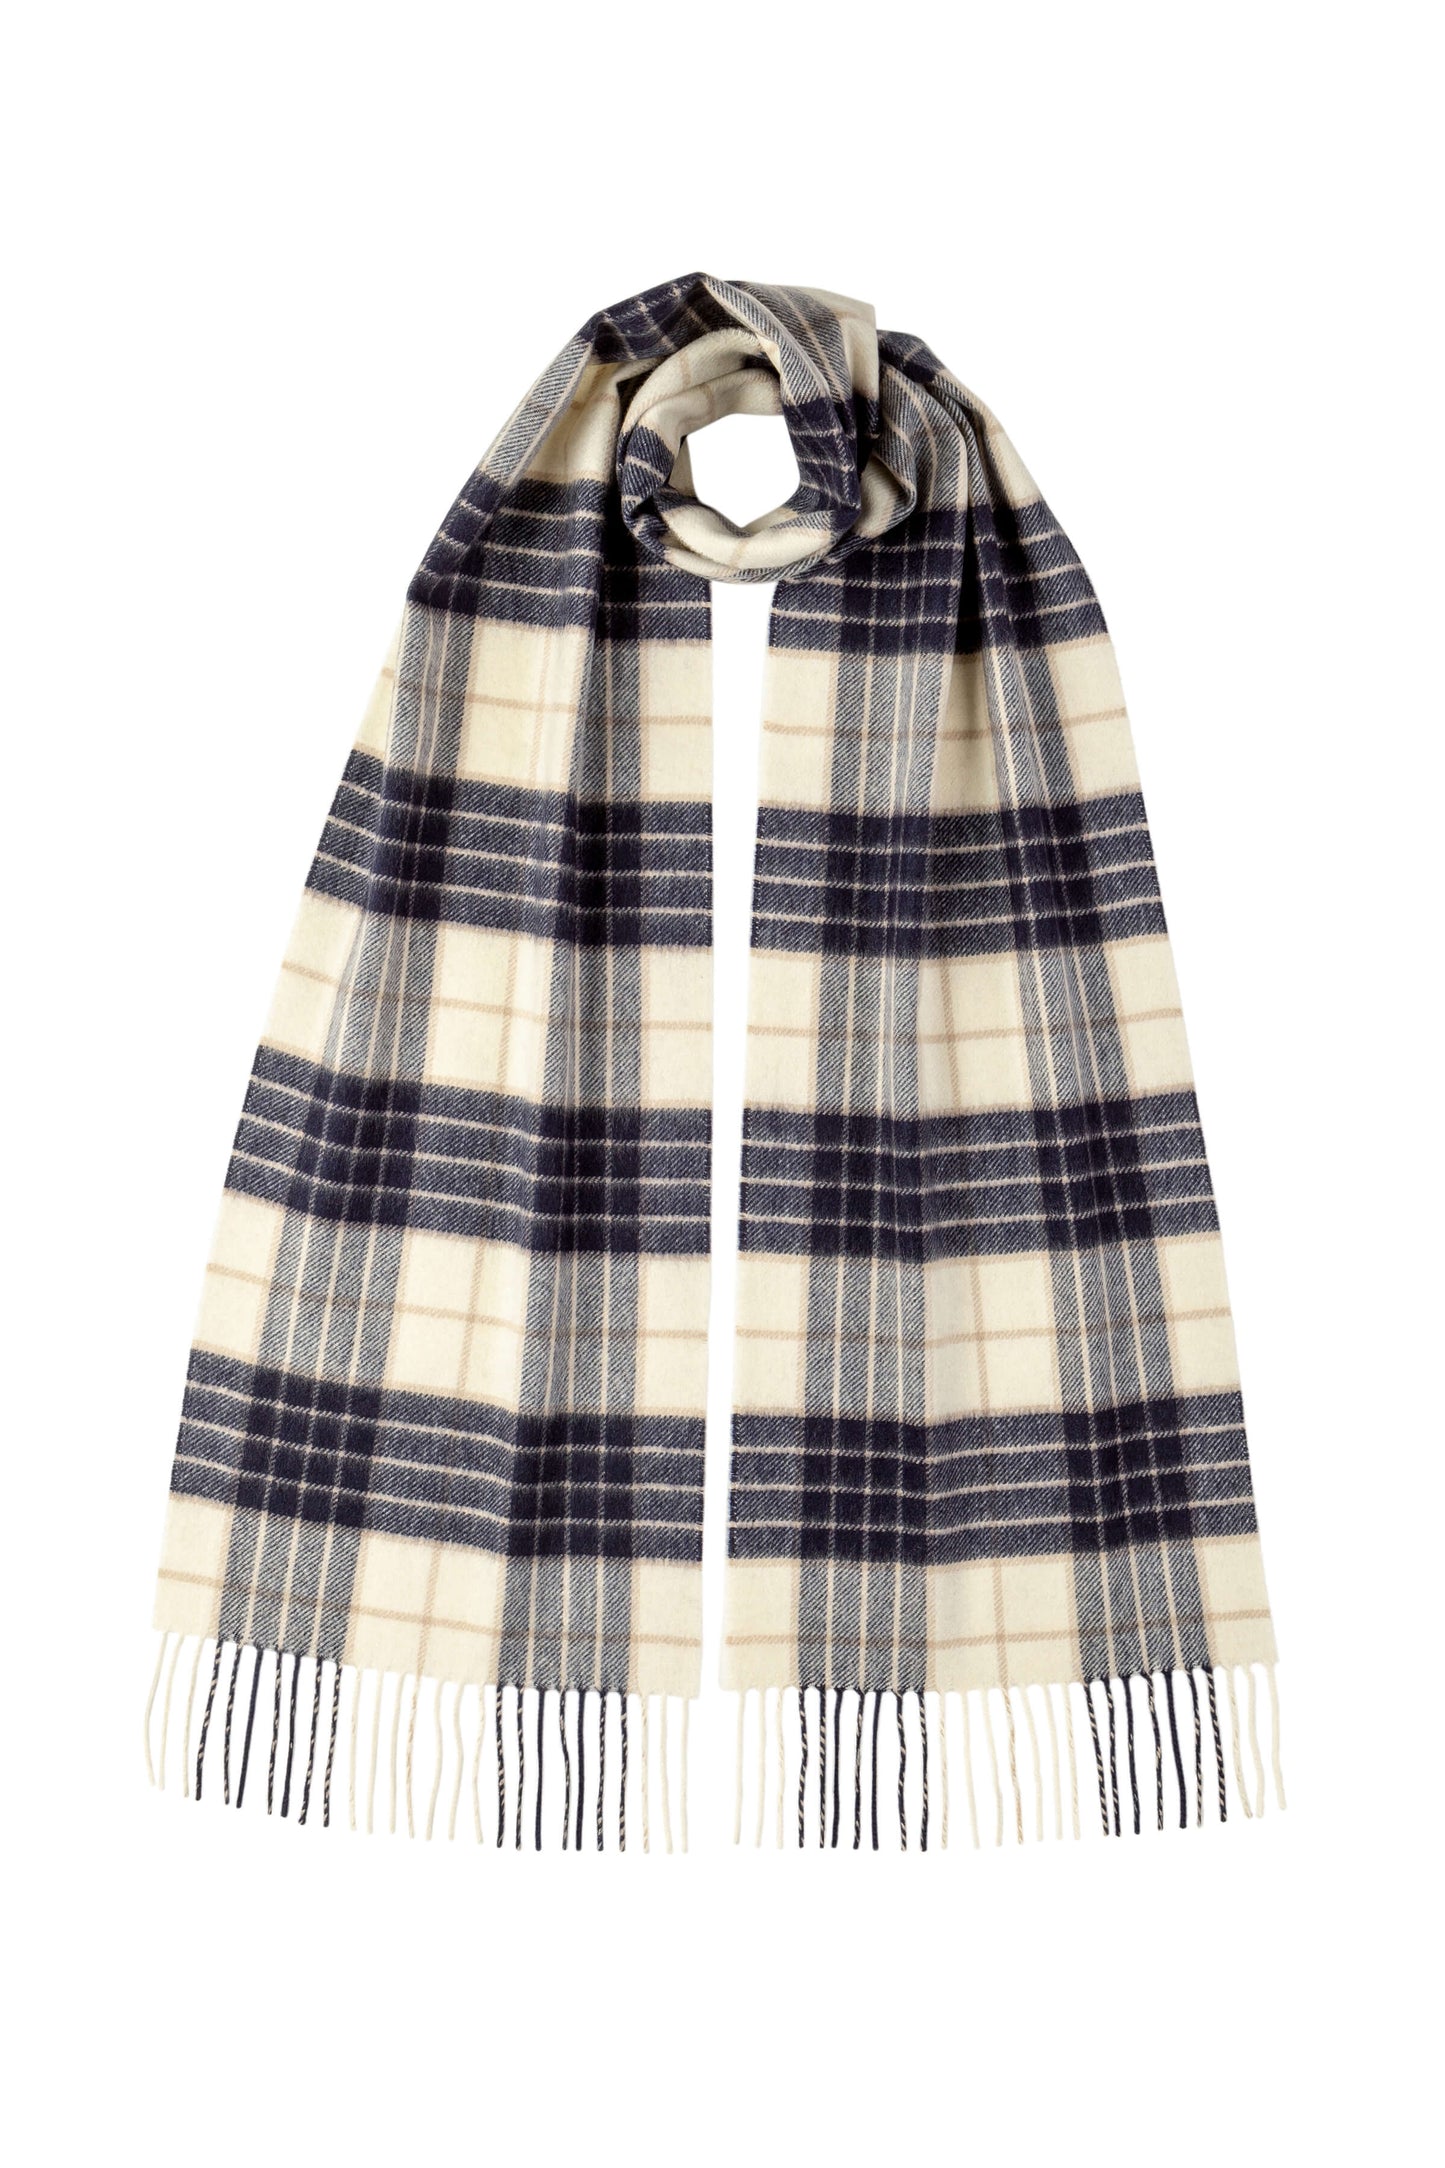 Johnstons of Elgin AW24 Woven Accessory Knockmore Tartan Cashmere Scarf WA000016RU5380N/A